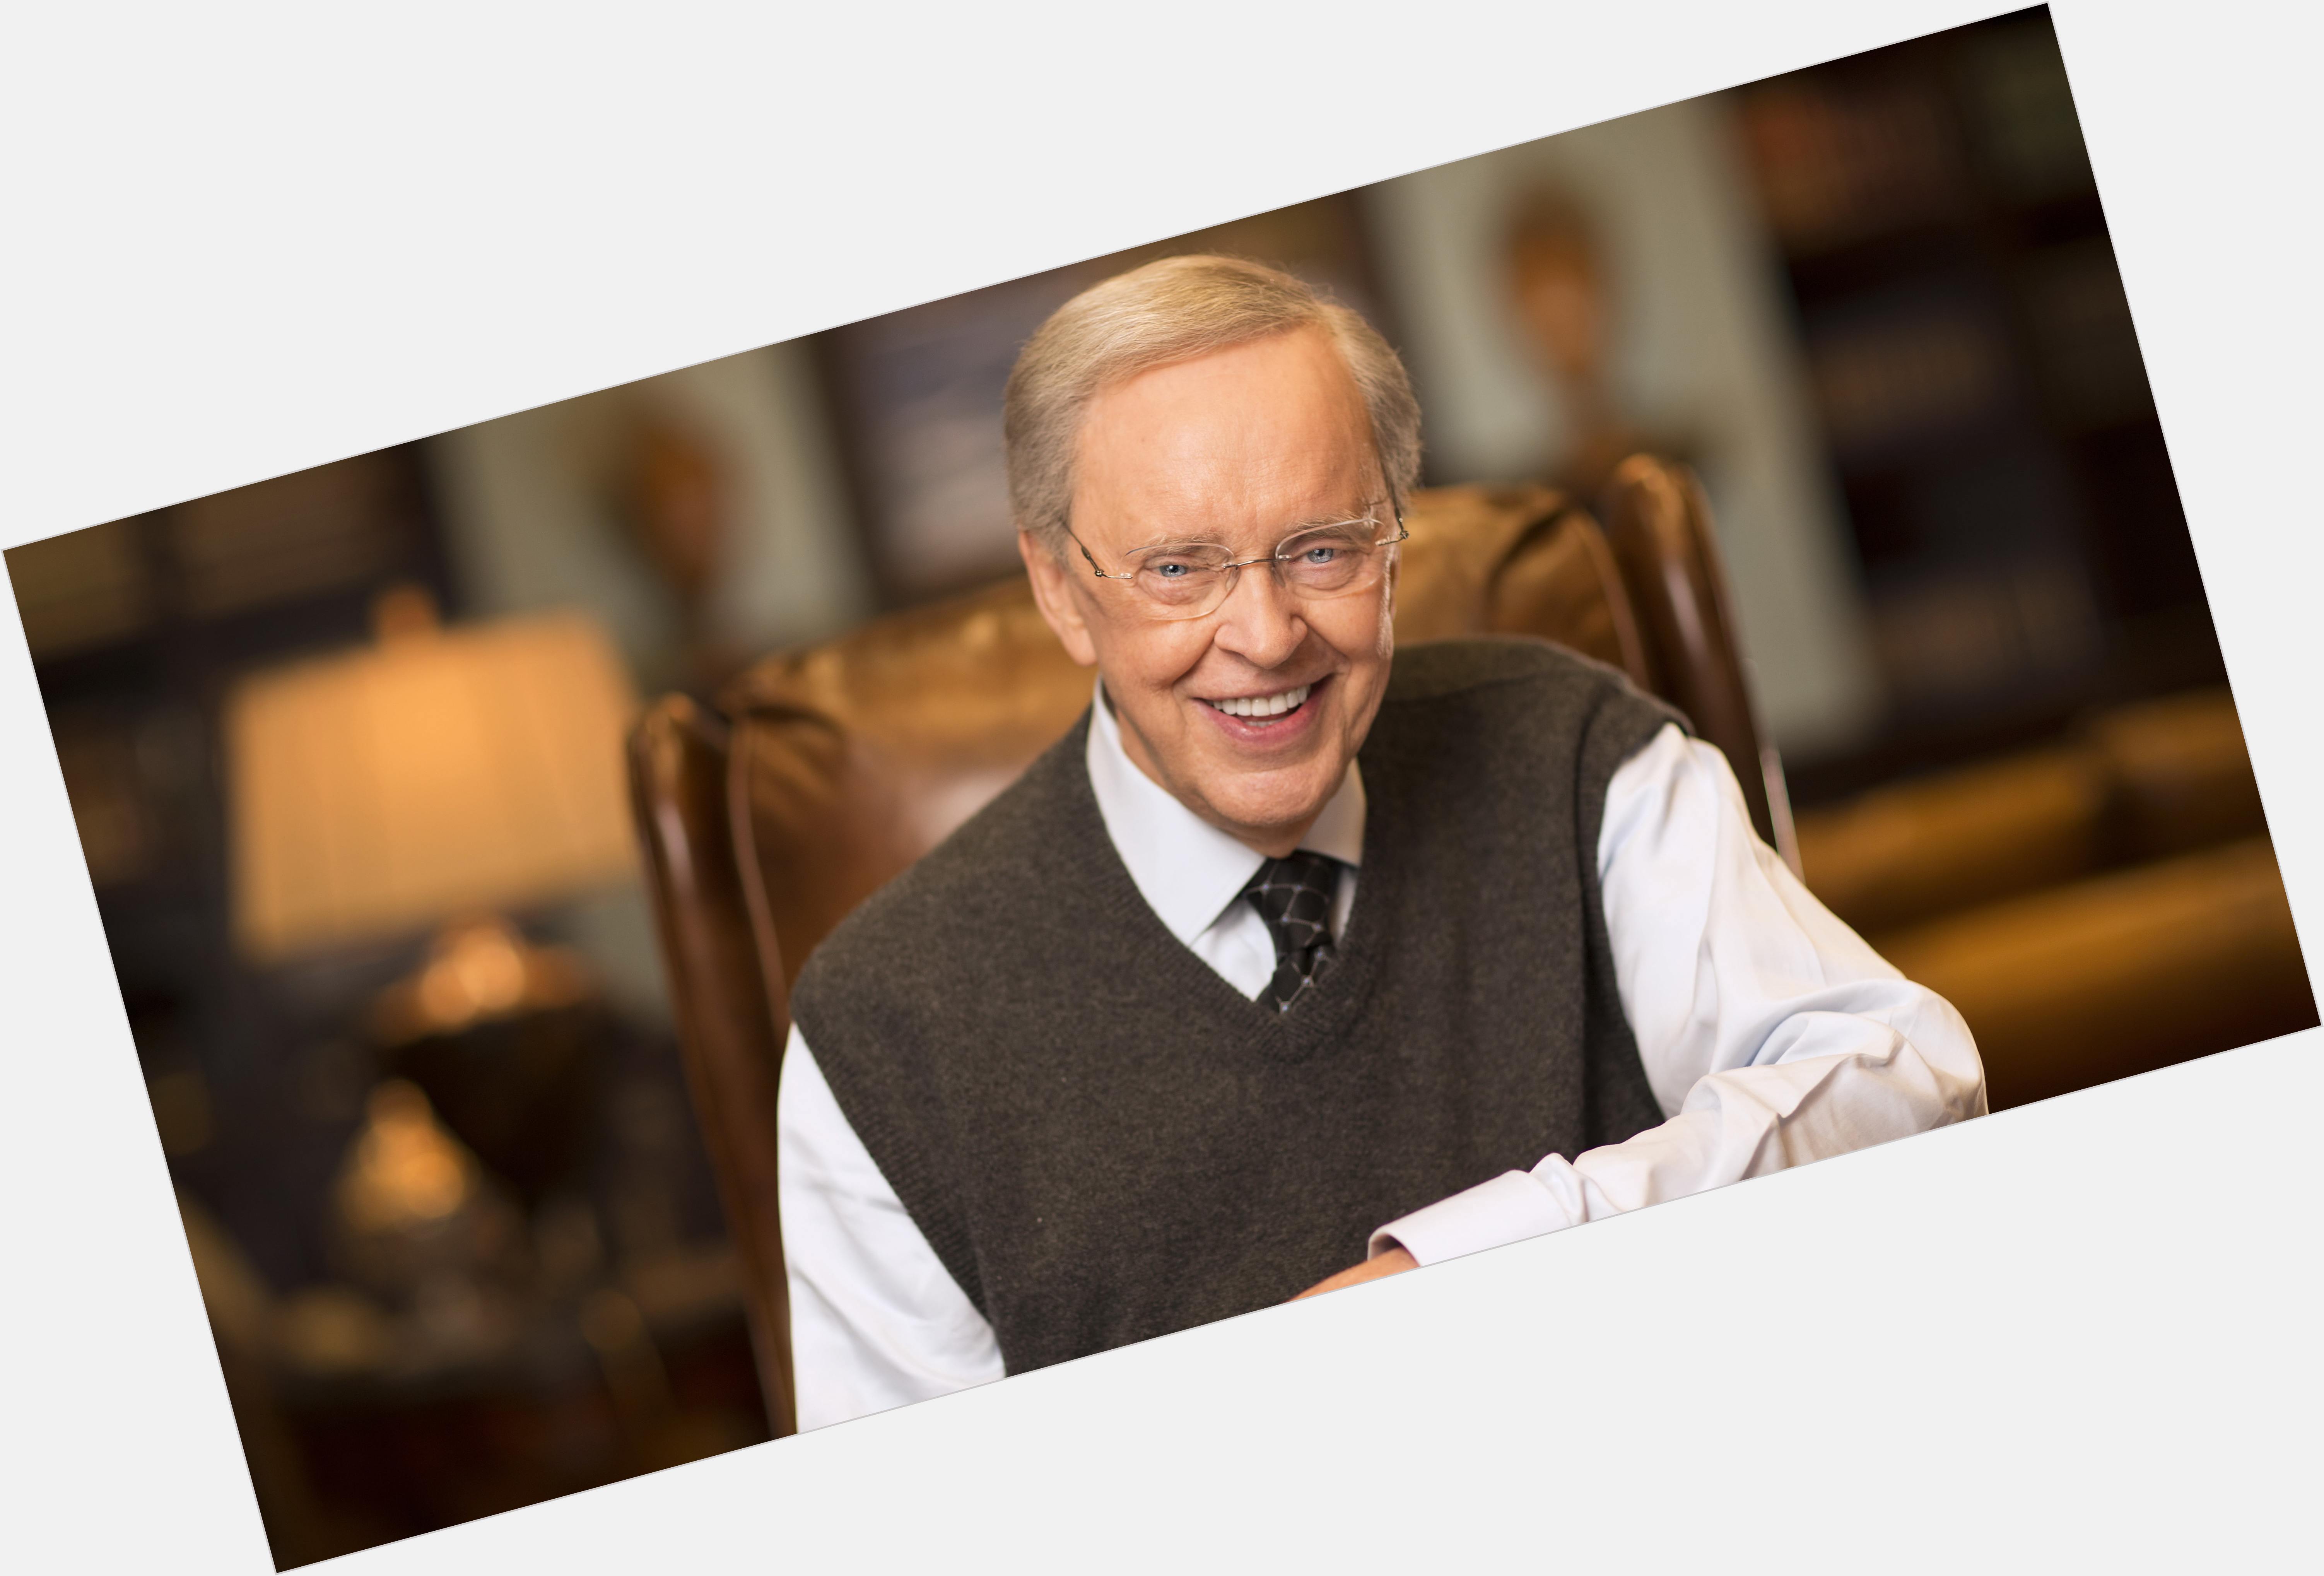 <a href="/hot-men/charles-stanley/where-dating-news-photos">Charles Stanley</a>  